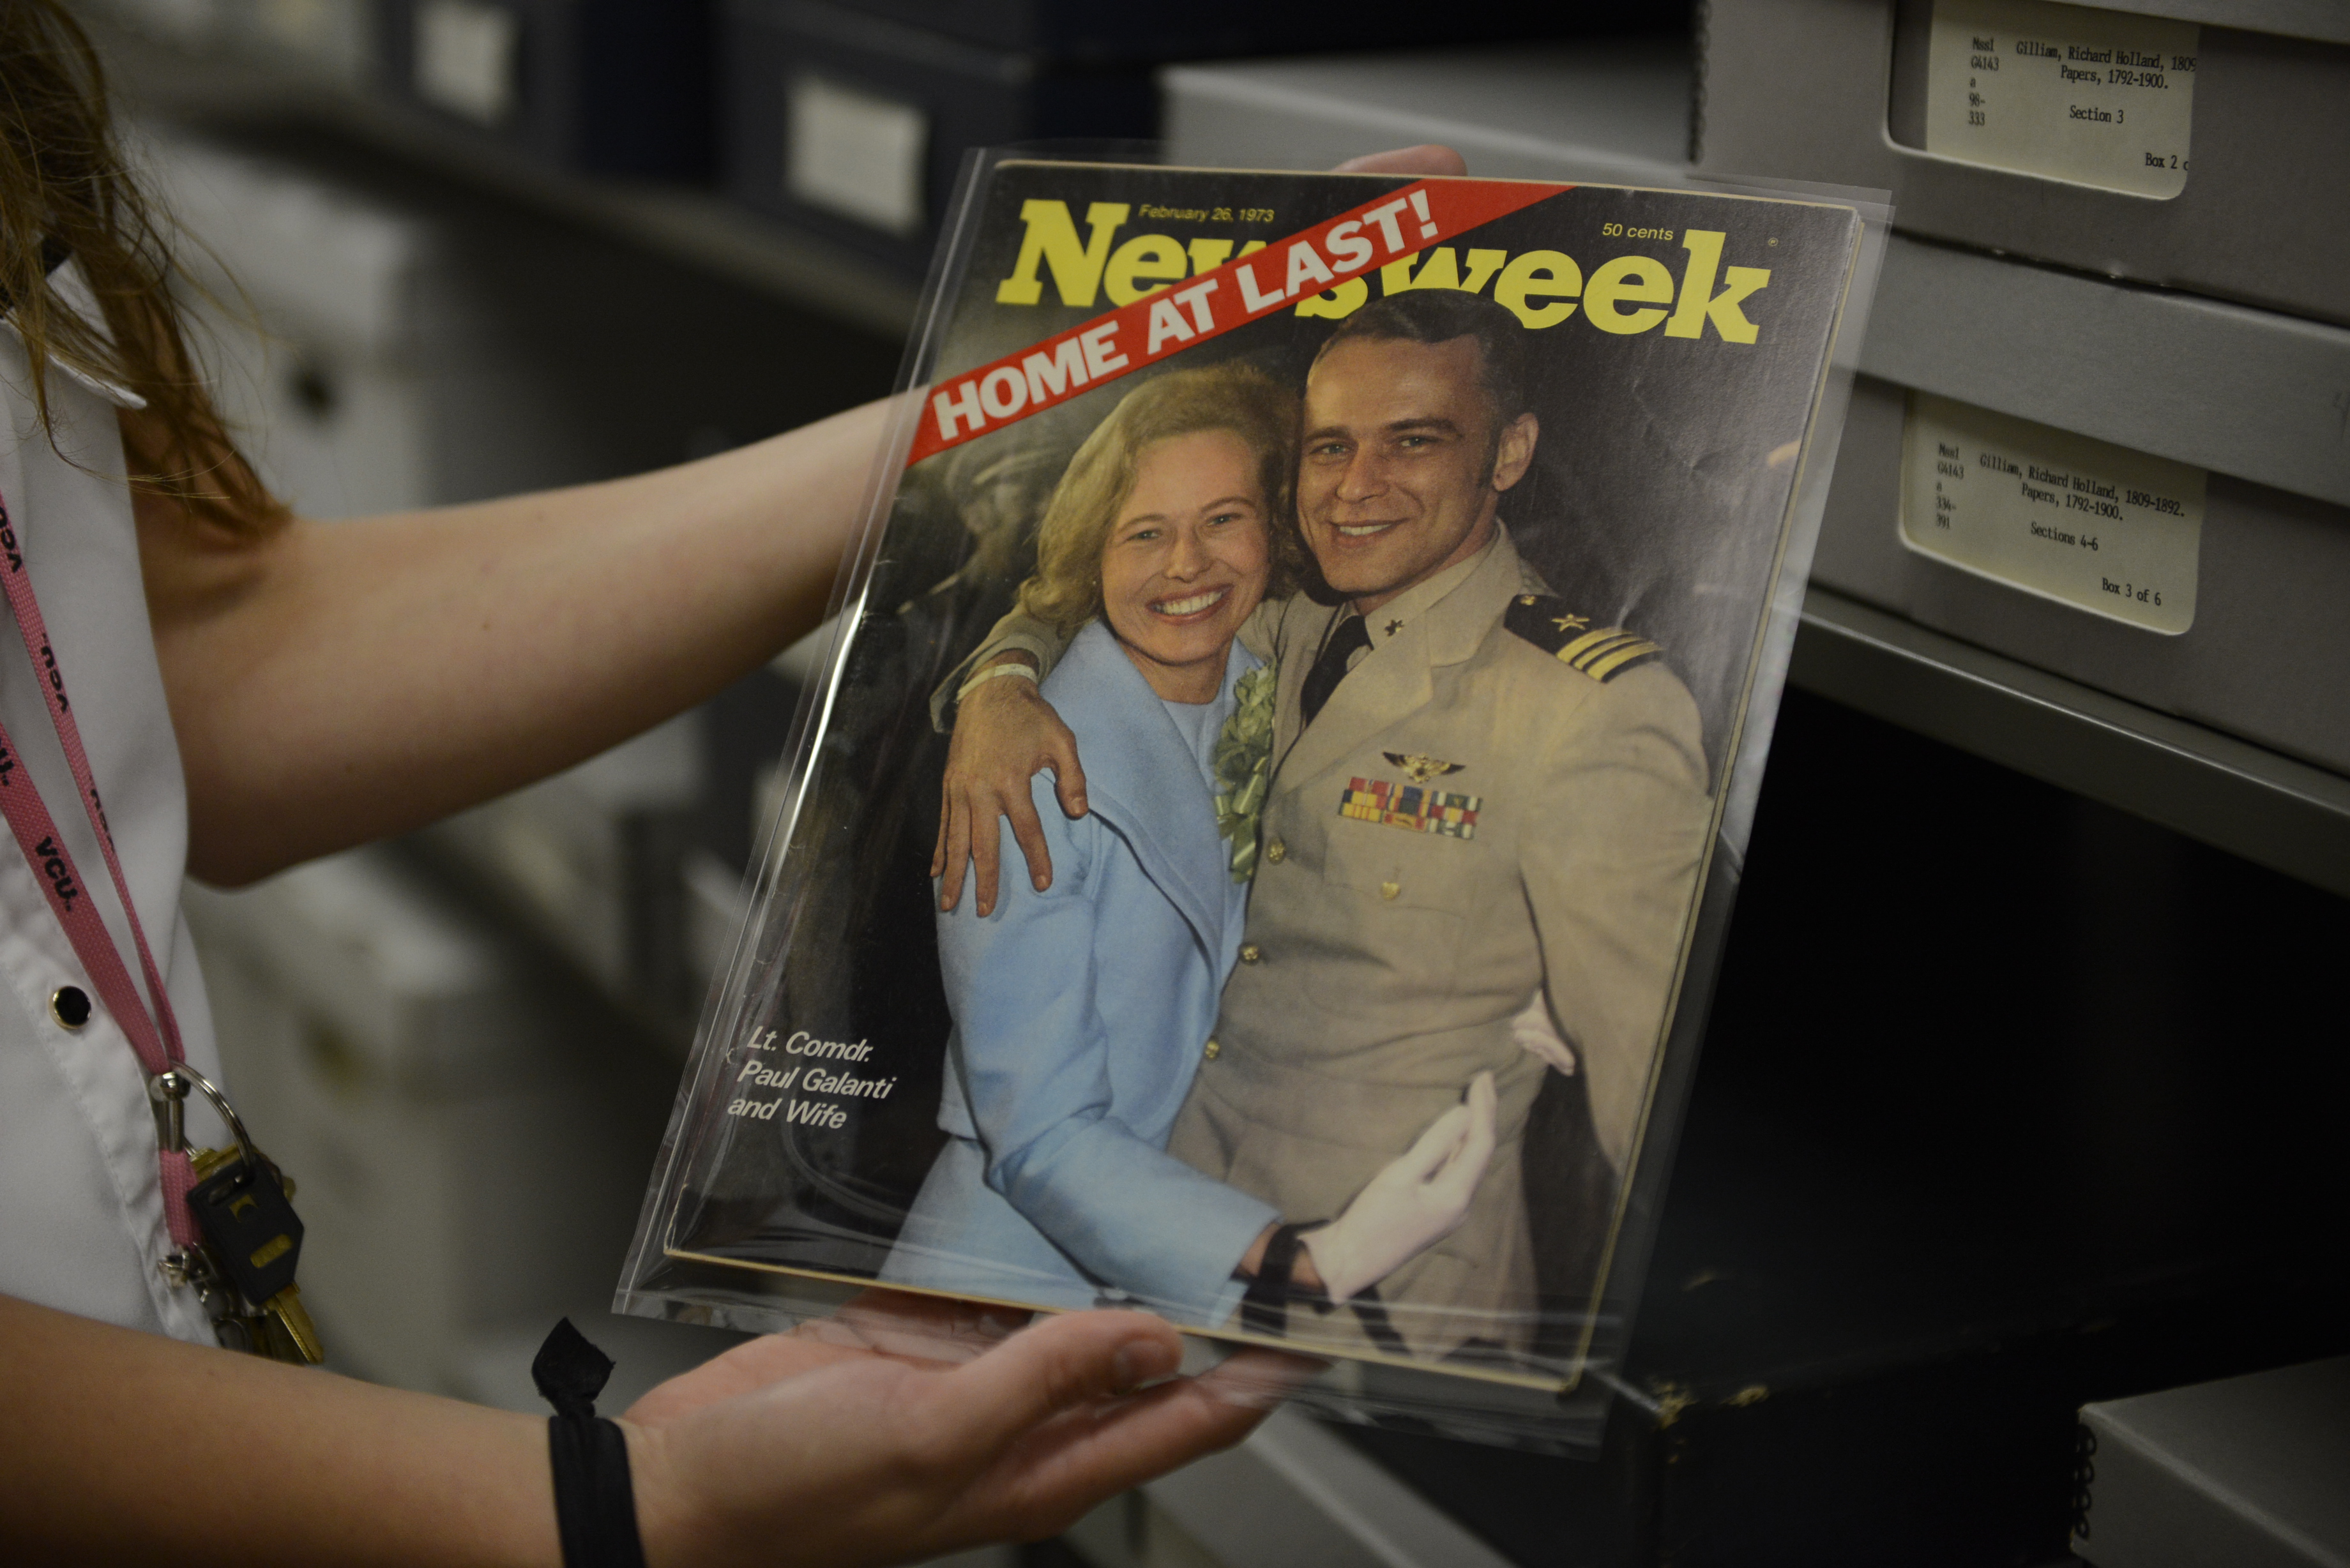 An archivist holds a historic issue of Newsweek magazine with the headline Home at Last! and a photo of Phyllis Galanti in a pale blue jacket embracing her husband Paul Galanti in U.S. military uniform